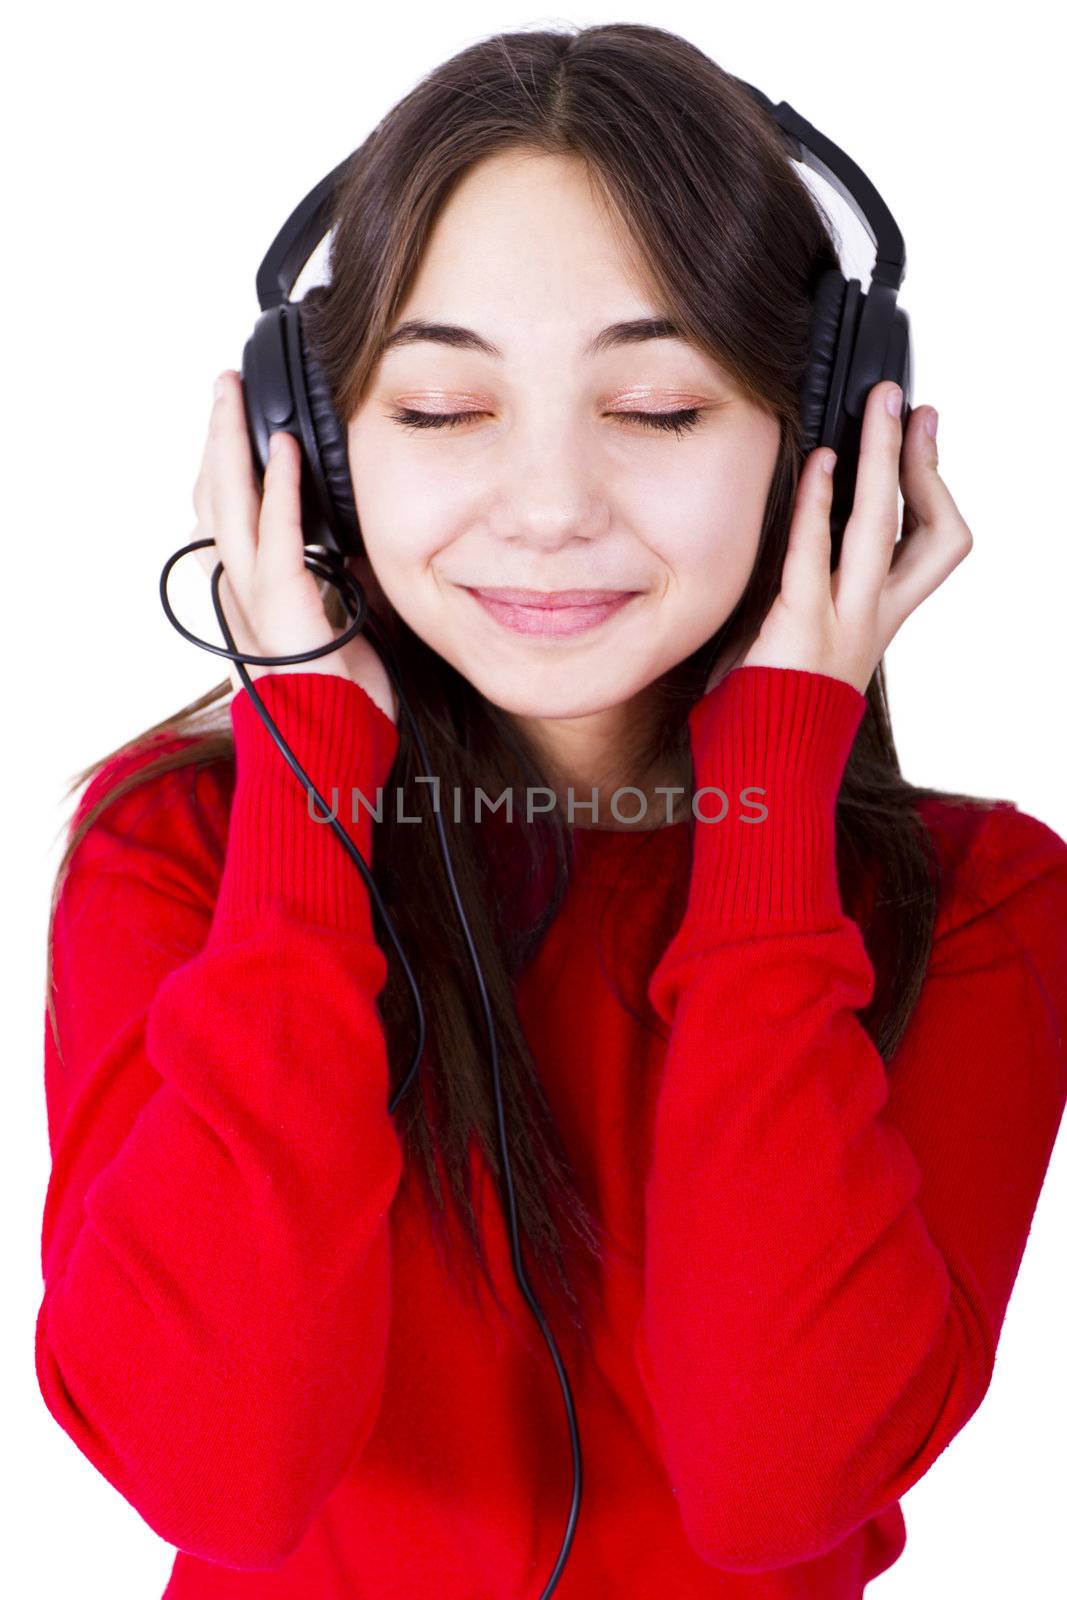 Young woman listening the music her eyes closed and looks like feeling the rhythm. Isolated on white background.